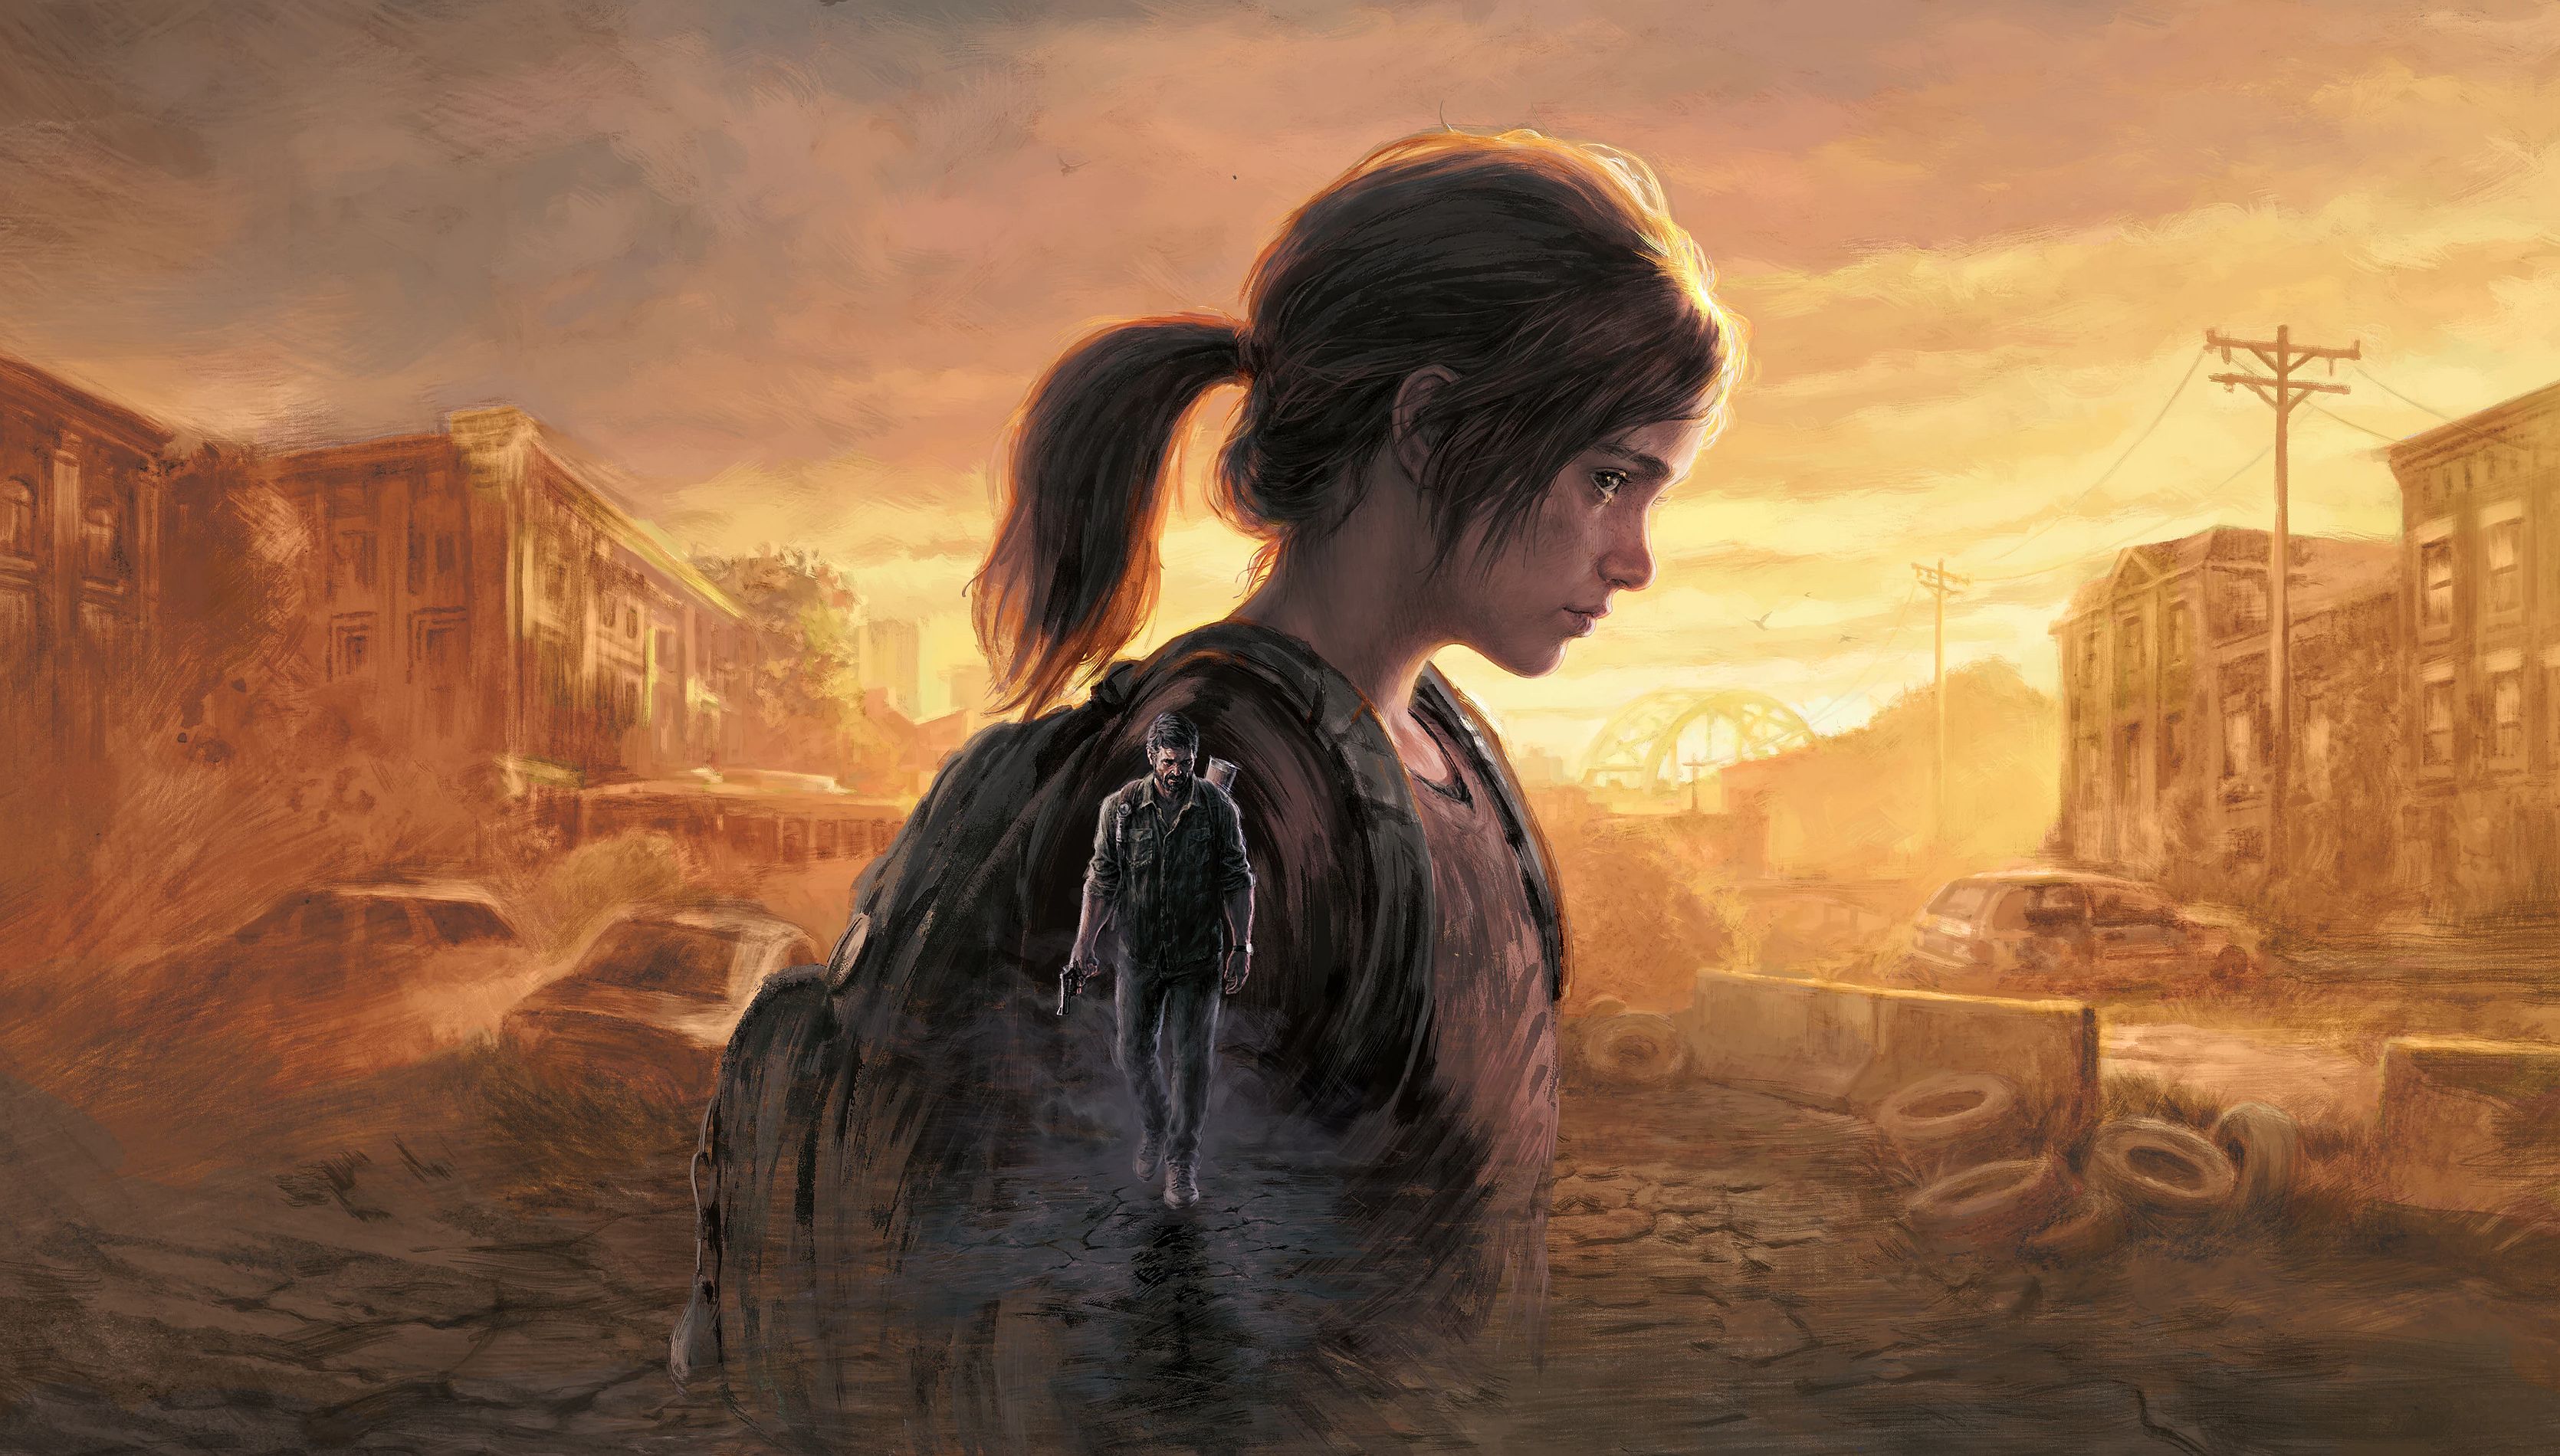 Image for Looks like The Last of Us will premiere on HBO in January